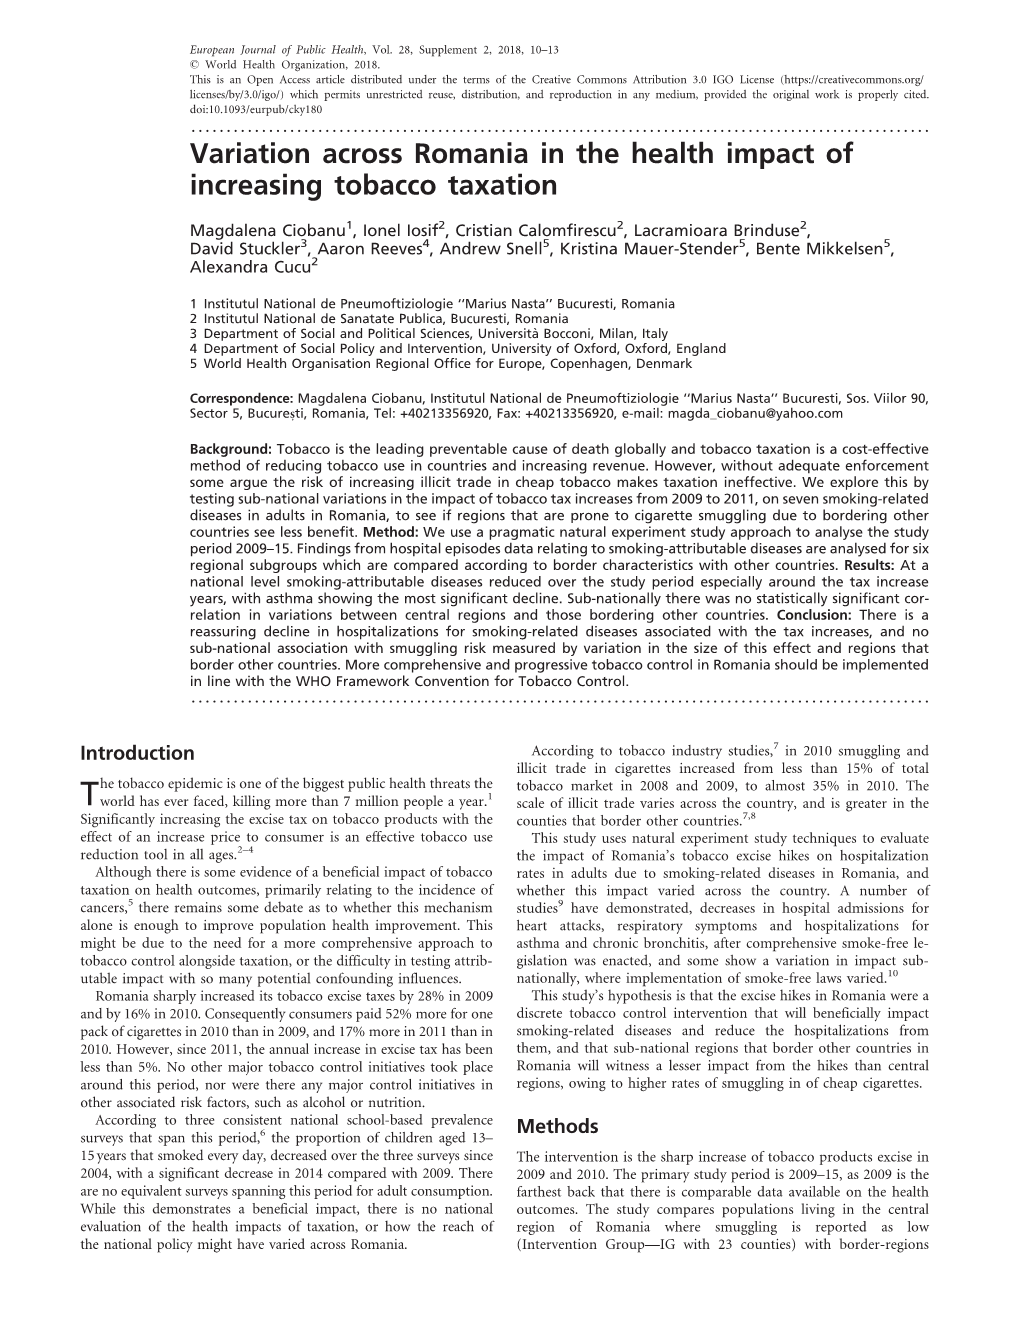 Variation Across Romania in the Health Impact of Increasing Tobacco Taxation